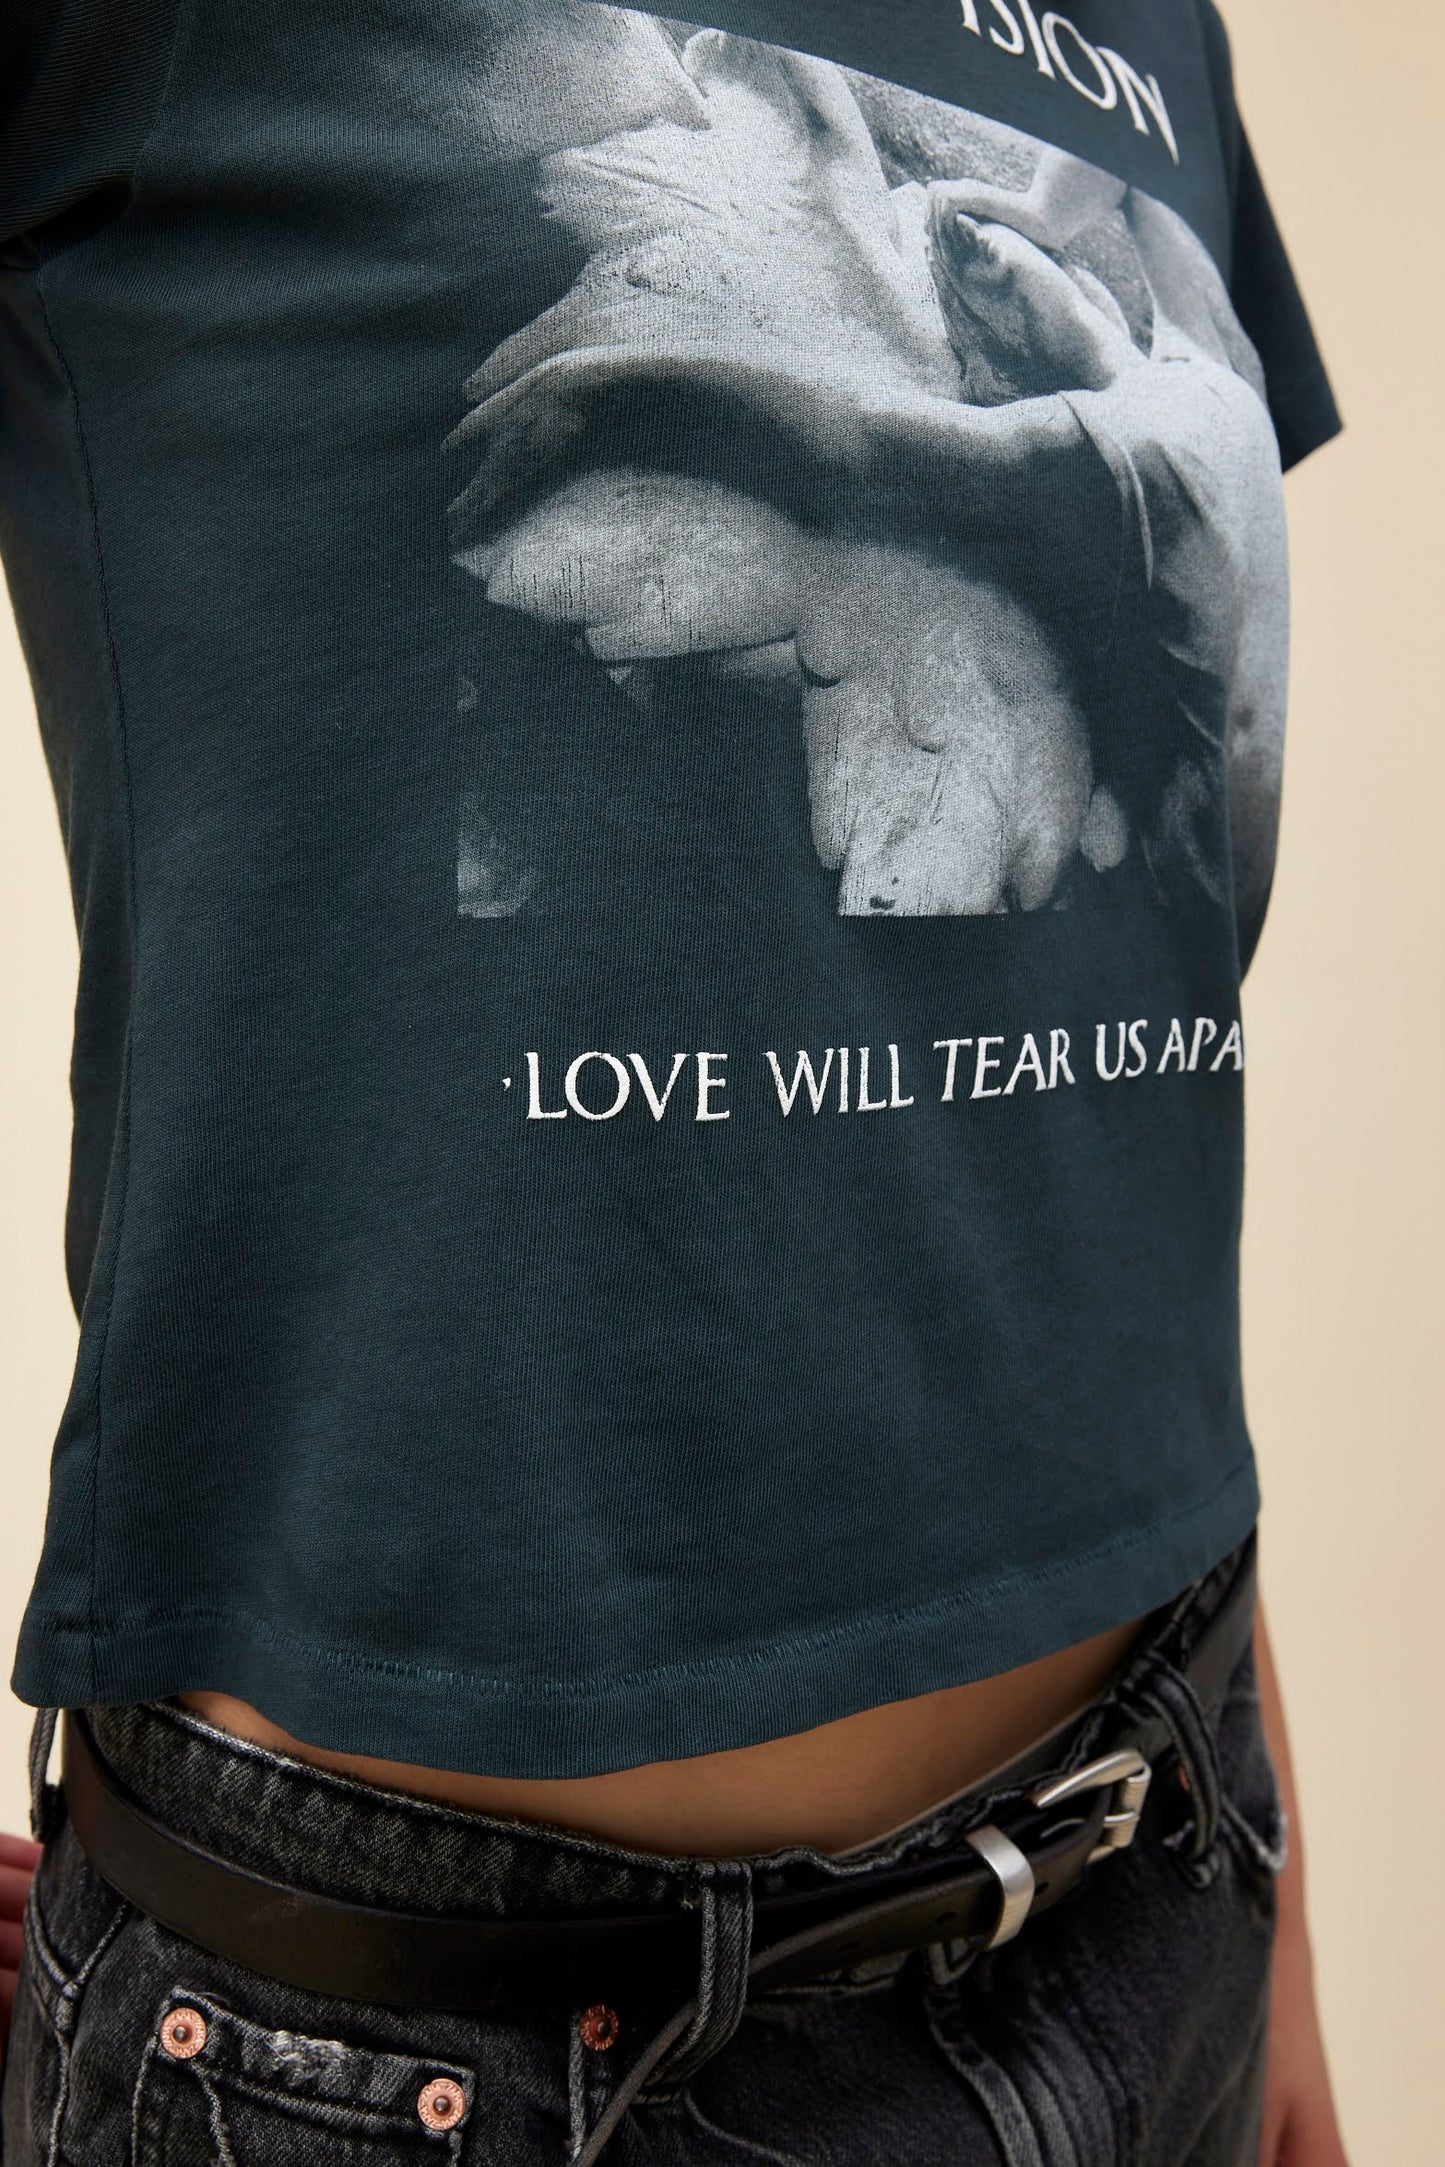 Model wearing a fitted graphic tee with Joy Division 'Love Will Tear Us Apart' artwork and a slightly cropped length.